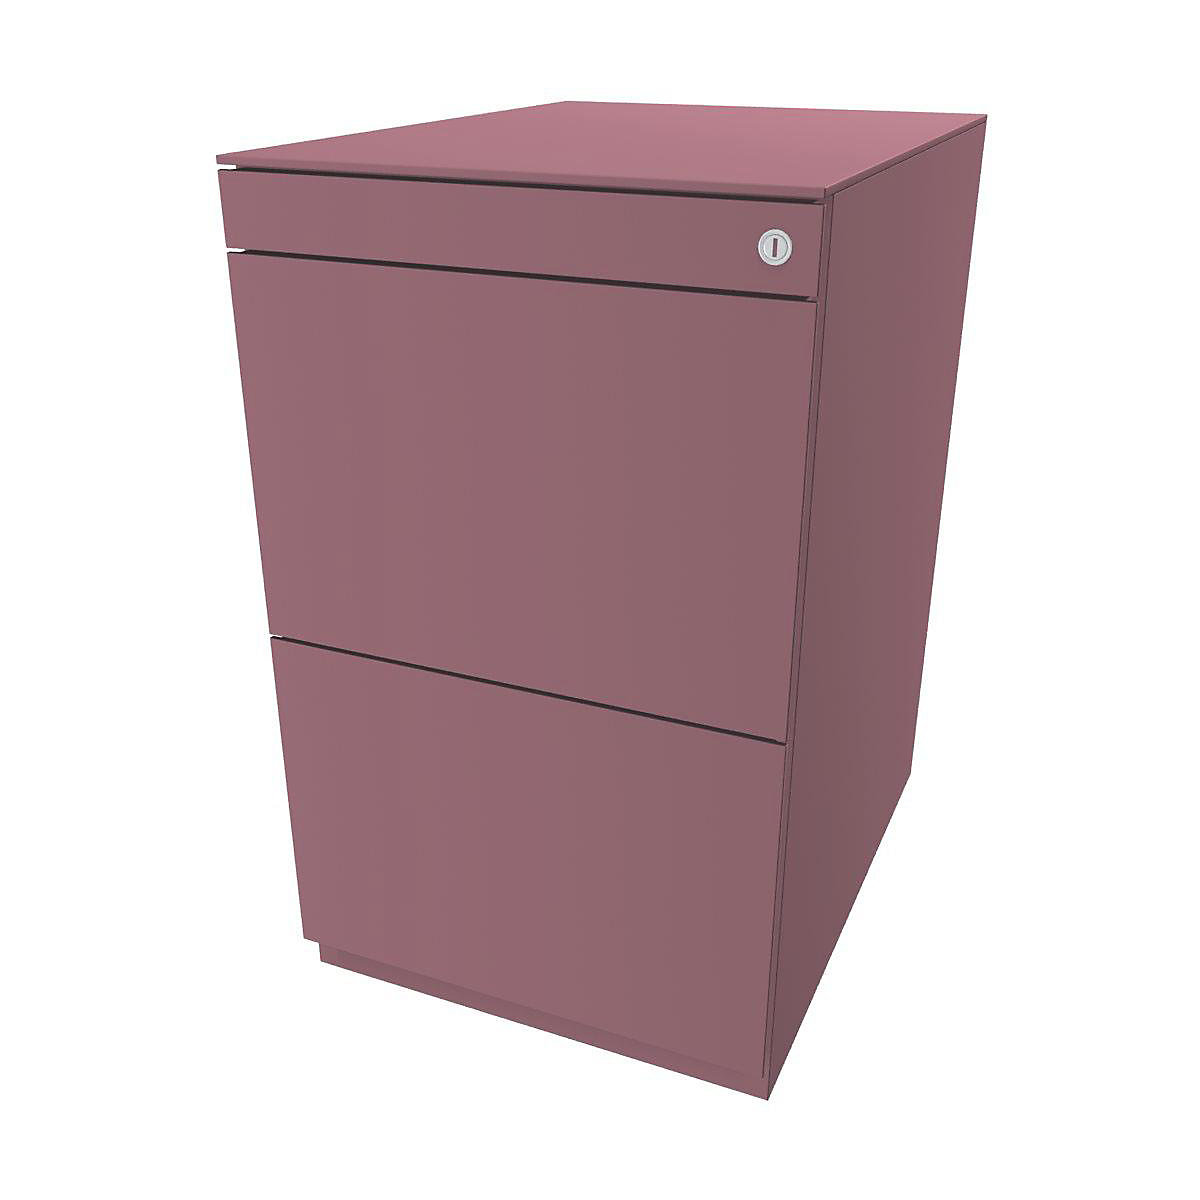 Note™ fixed pedestal, with 2 suspension file drawers - BISLEY